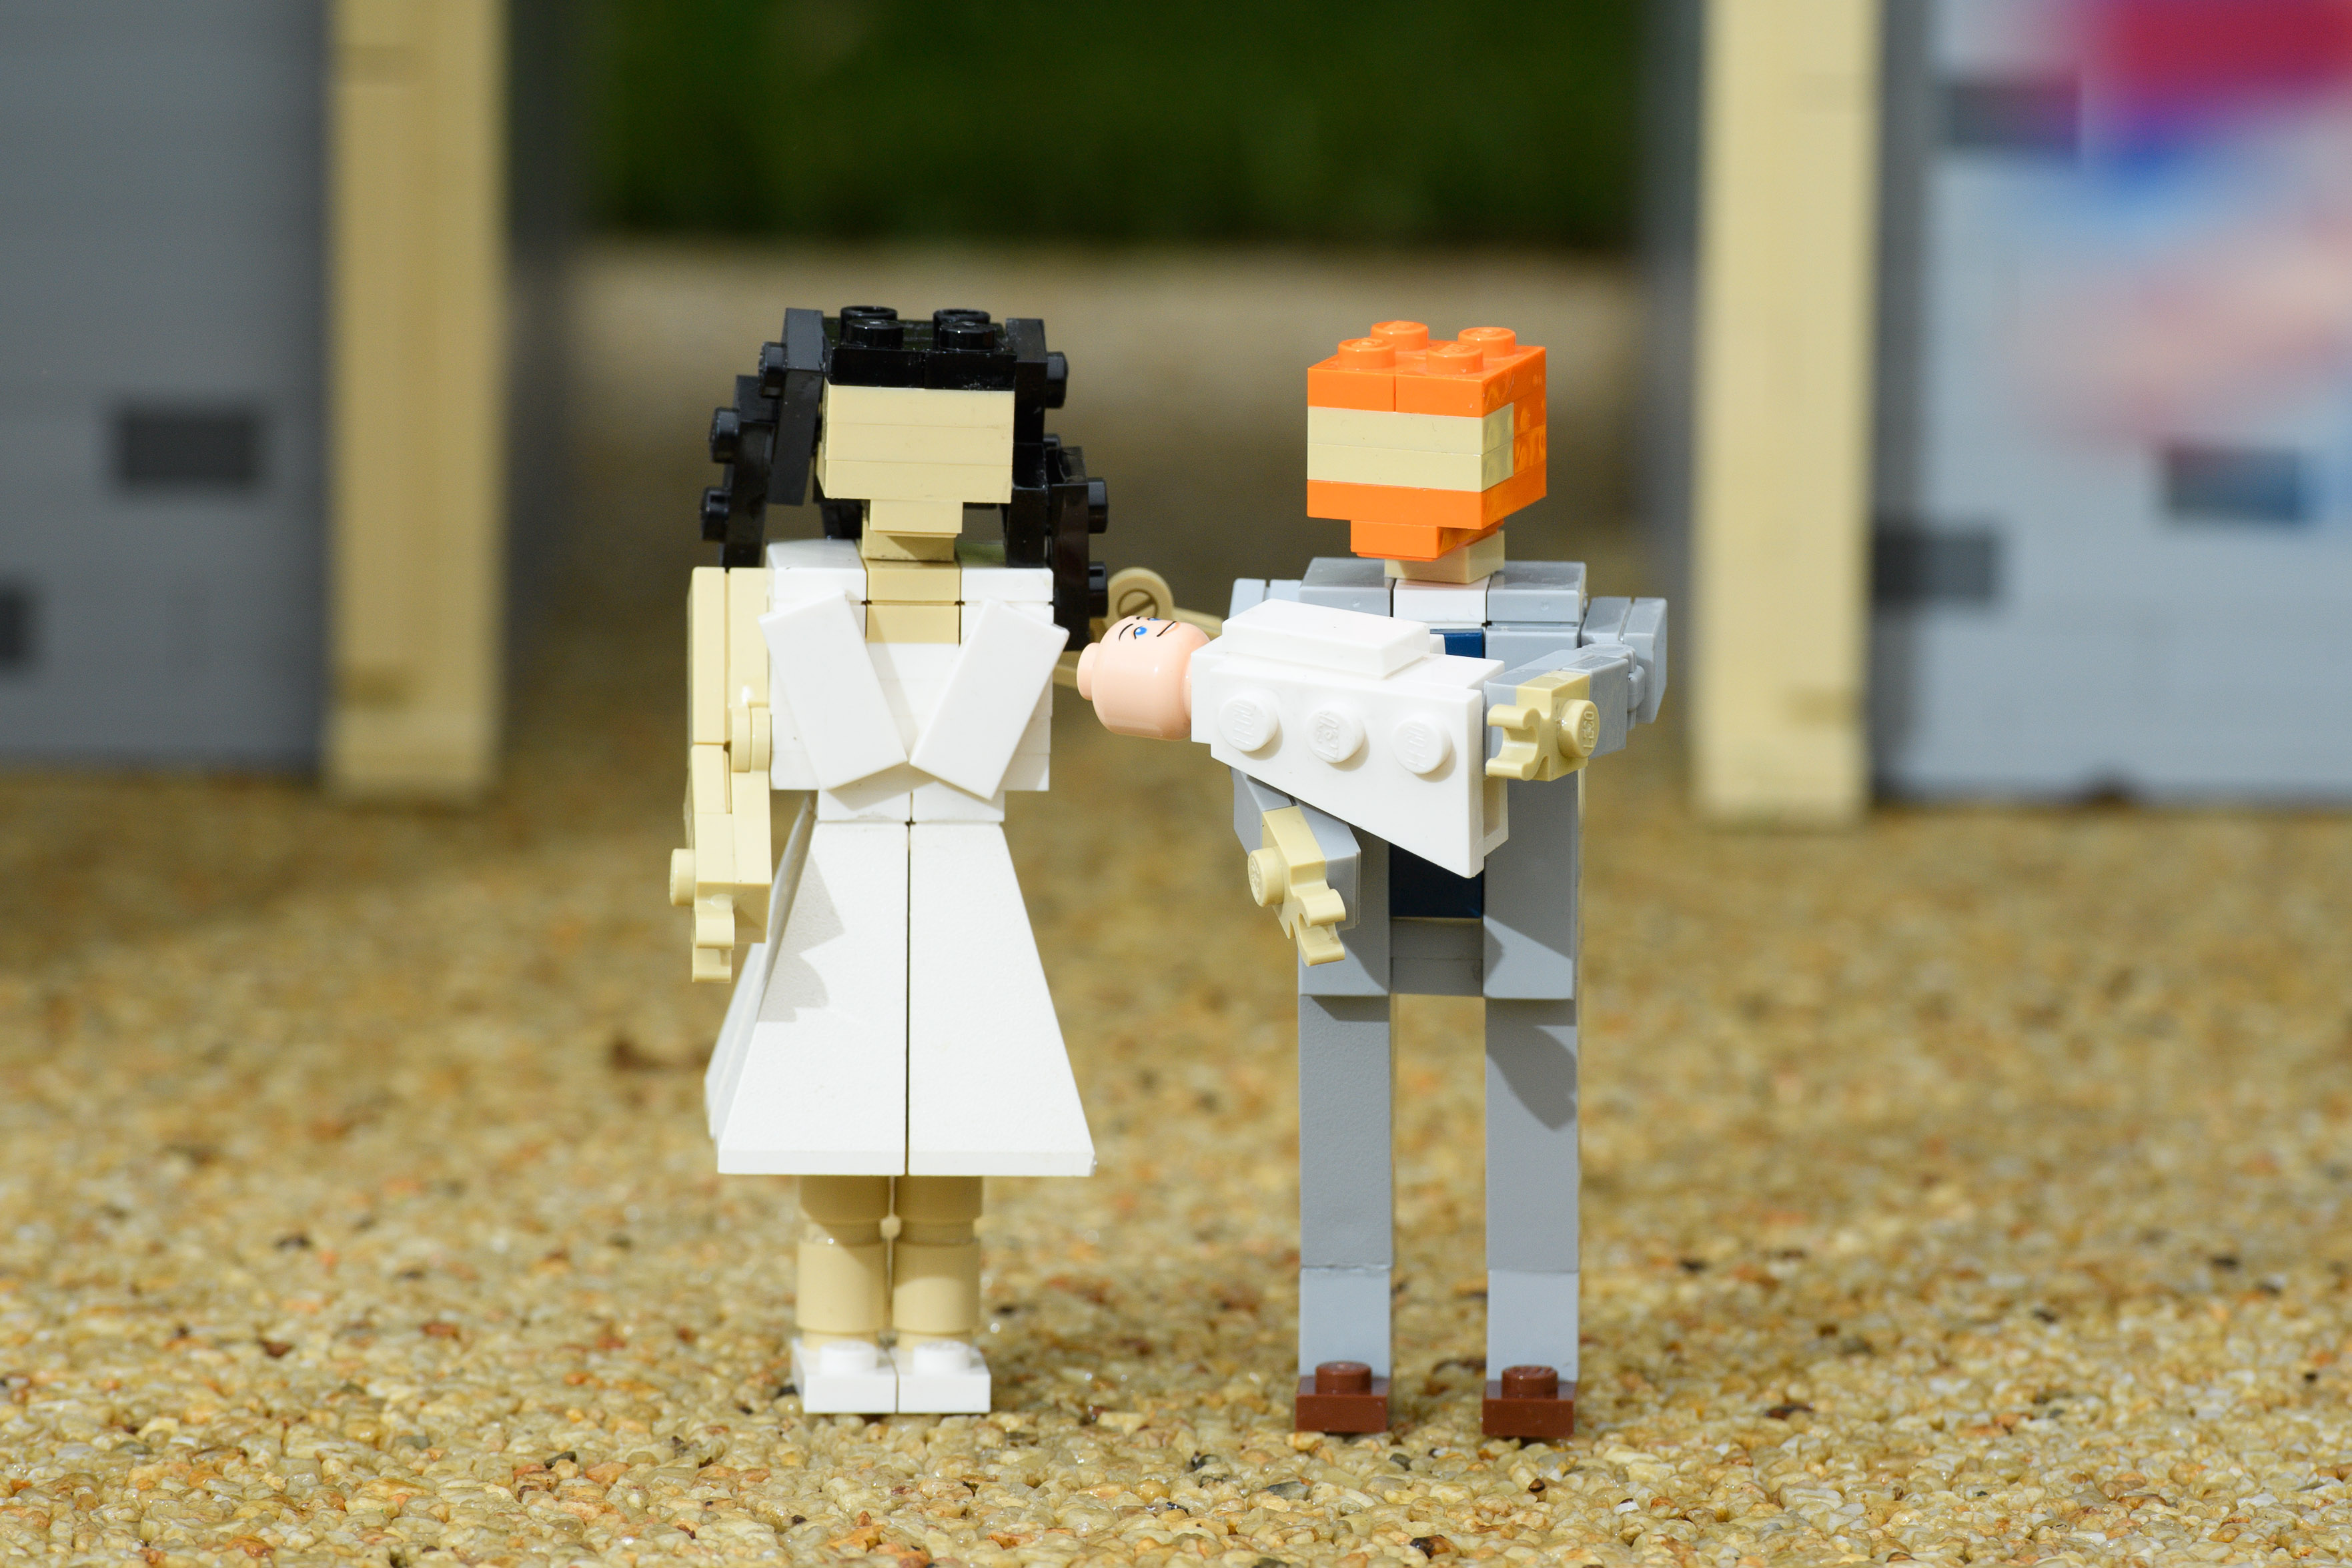 Free Entry to Archie at LEGOLAND Windsor Resort: LEGO model of Prince Harry, Meghan Markle and baby Archie